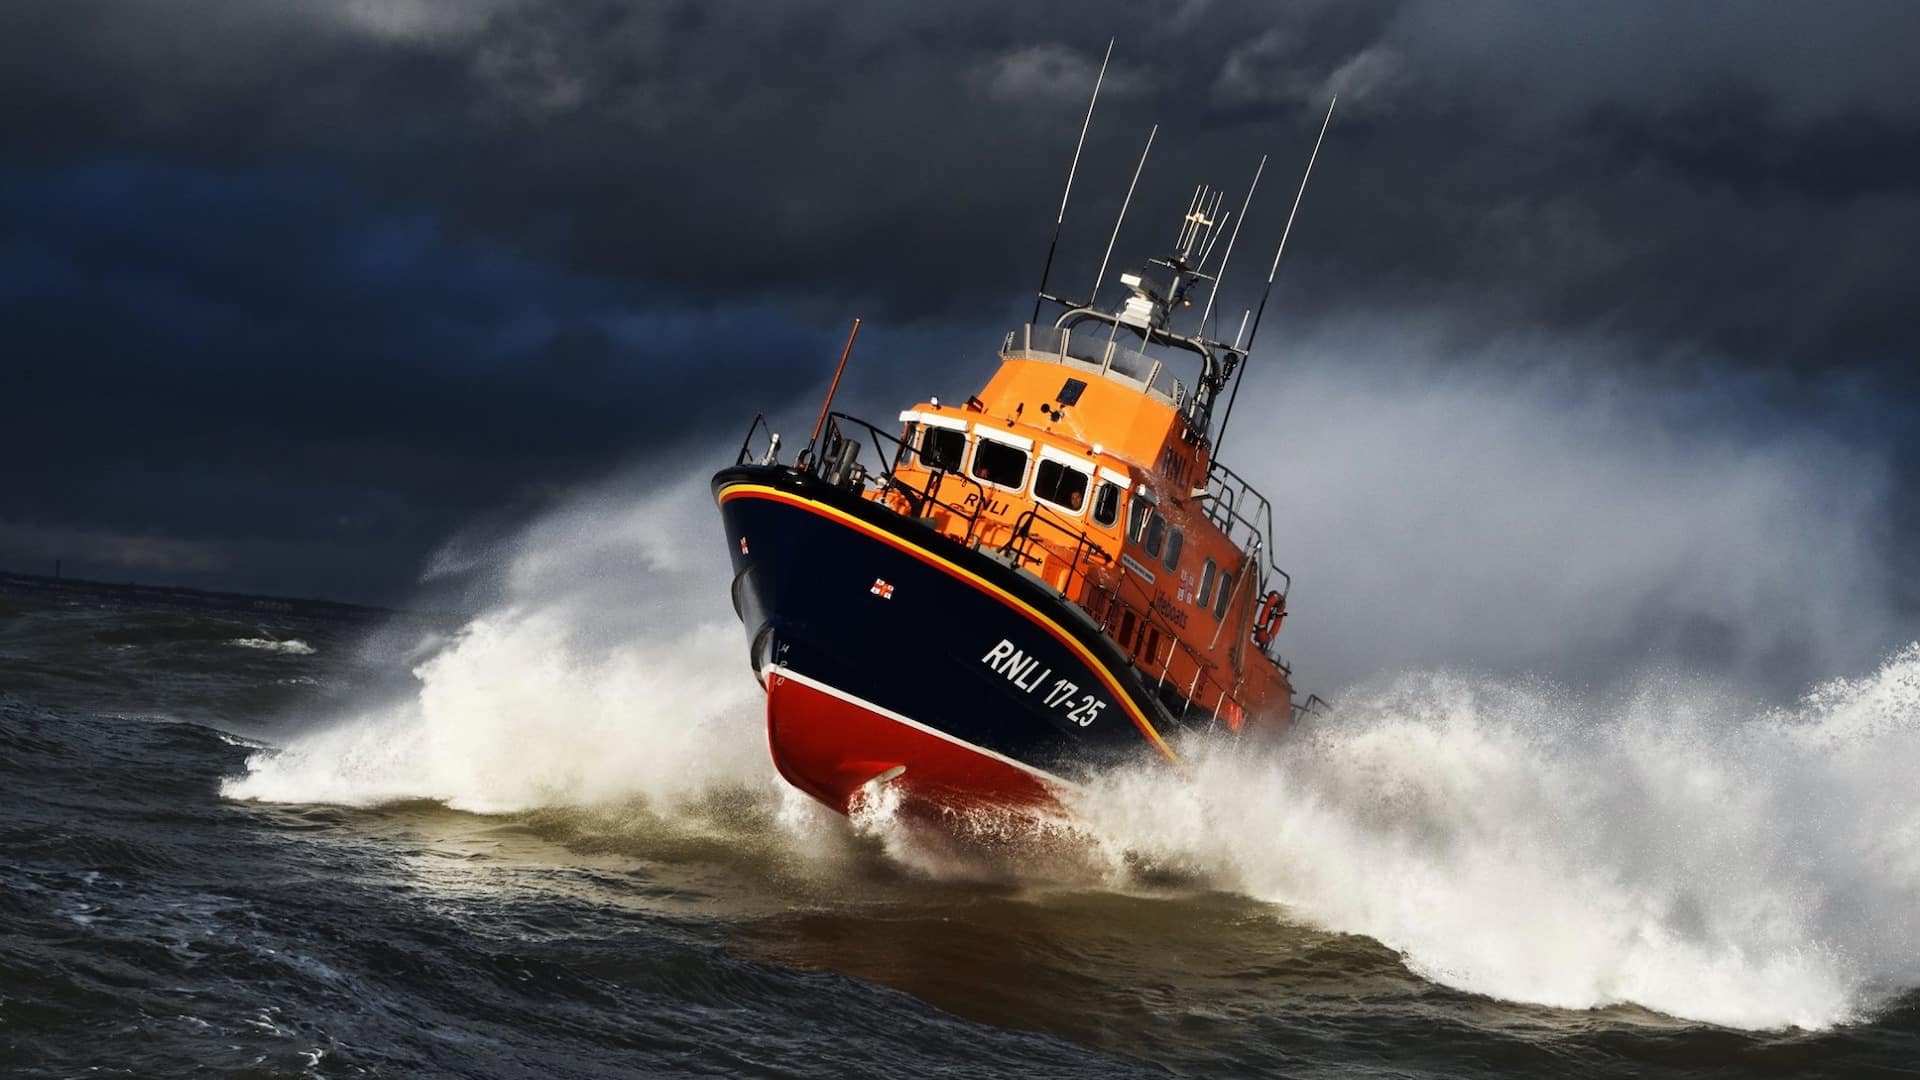 Roughest RNLI lifeboat rescues in huge waves and stormy seas